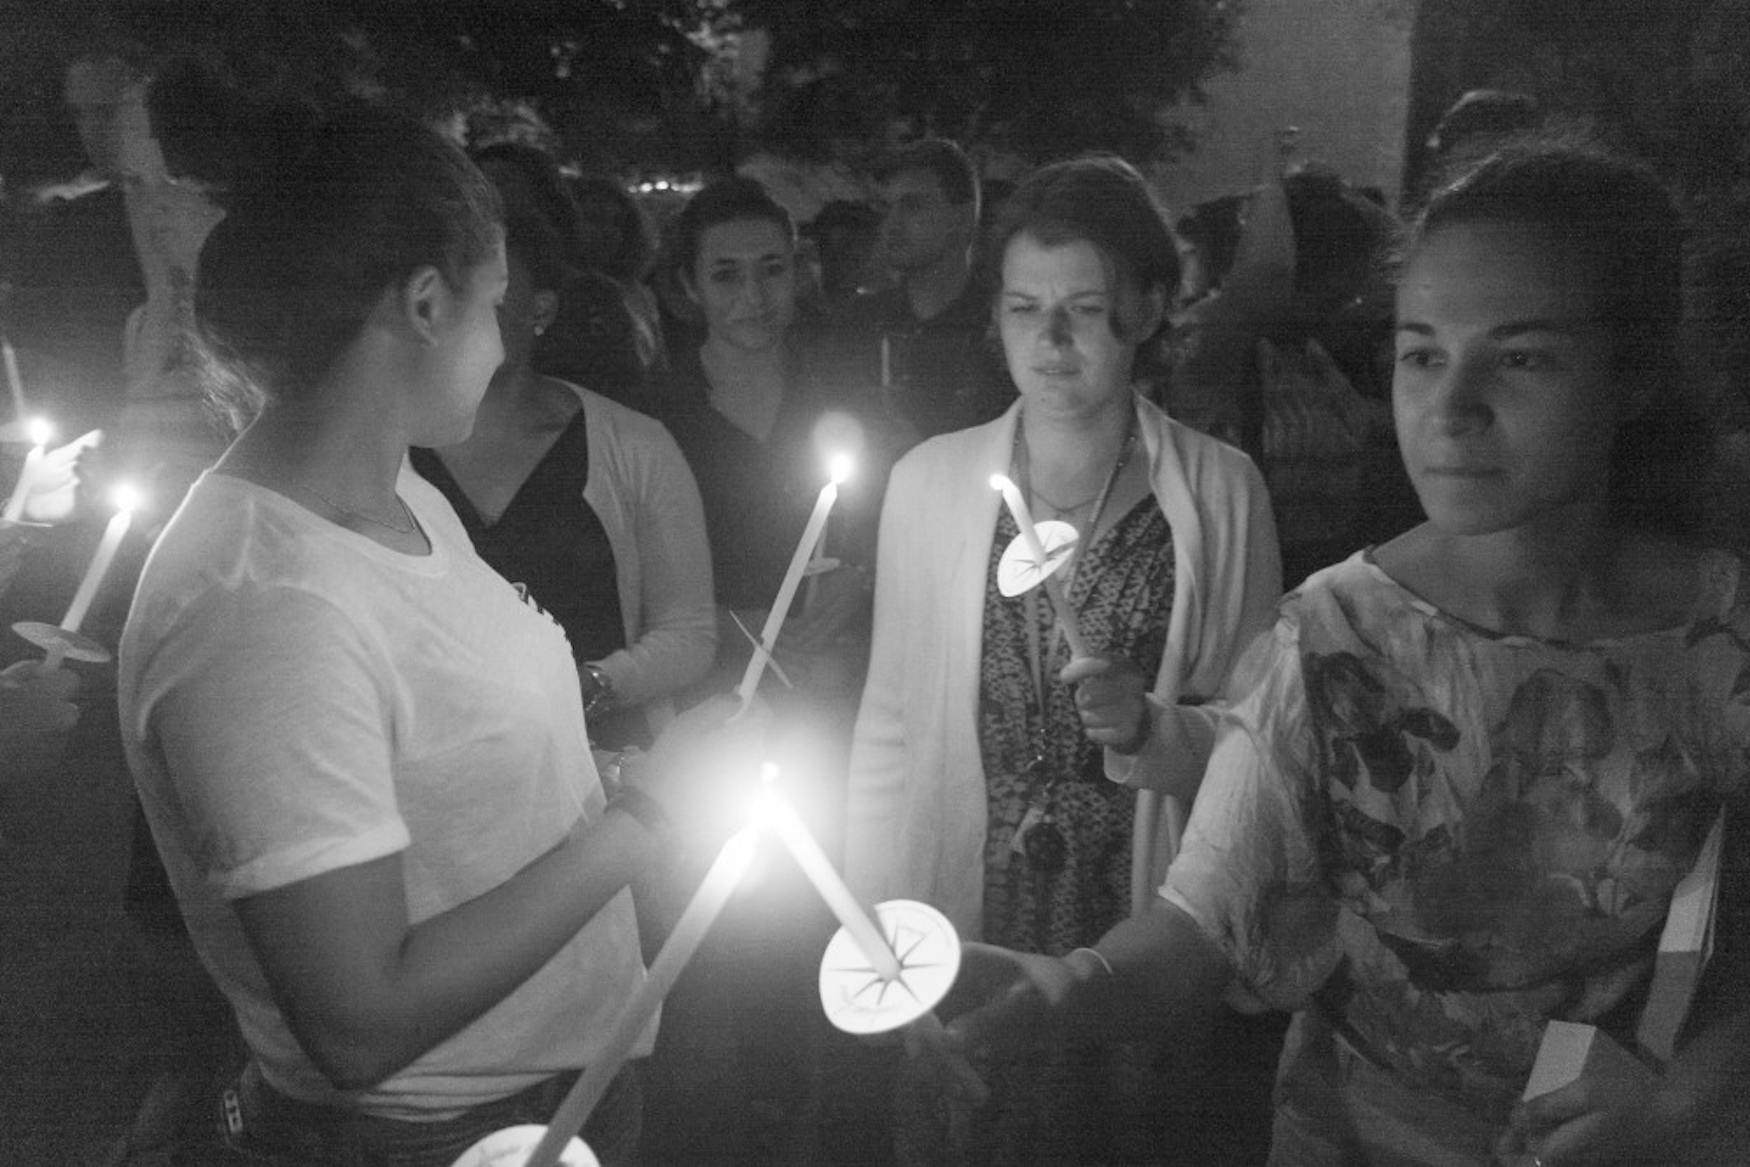 Students lit candles at the vigil held to remember Michael Brown of Missouri at Chapels Pond on Thursday night.